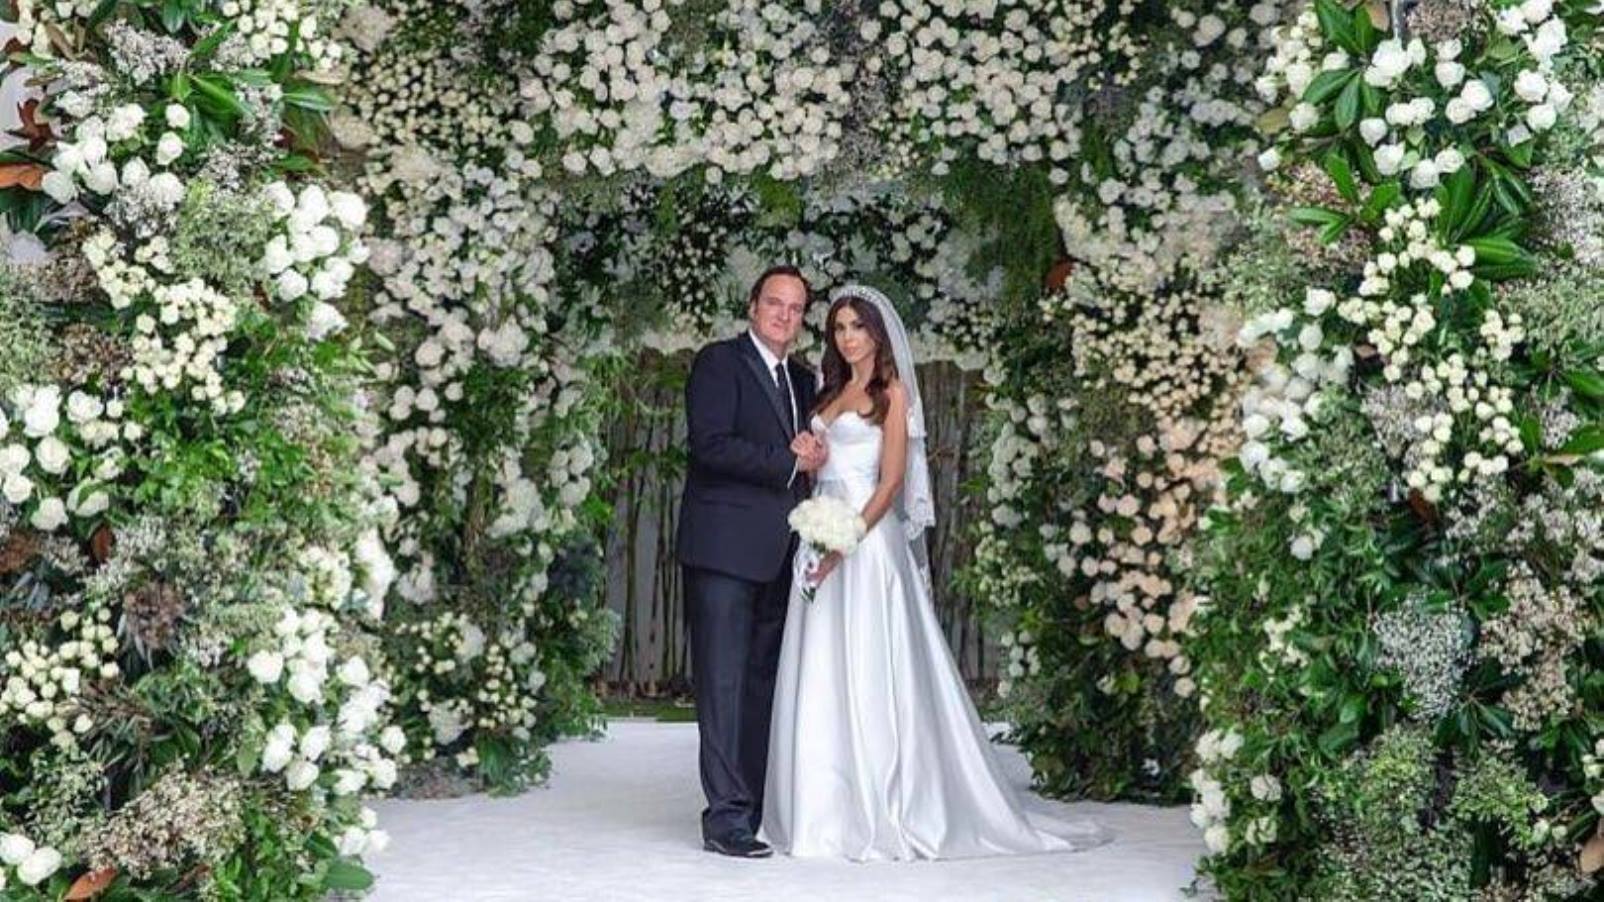 Daniella Pick wore a Dana Harel gown and Keren Wolf headpiece at her wedding to Quentin Tarantino. Photo by Curtis Dahl via Instagram